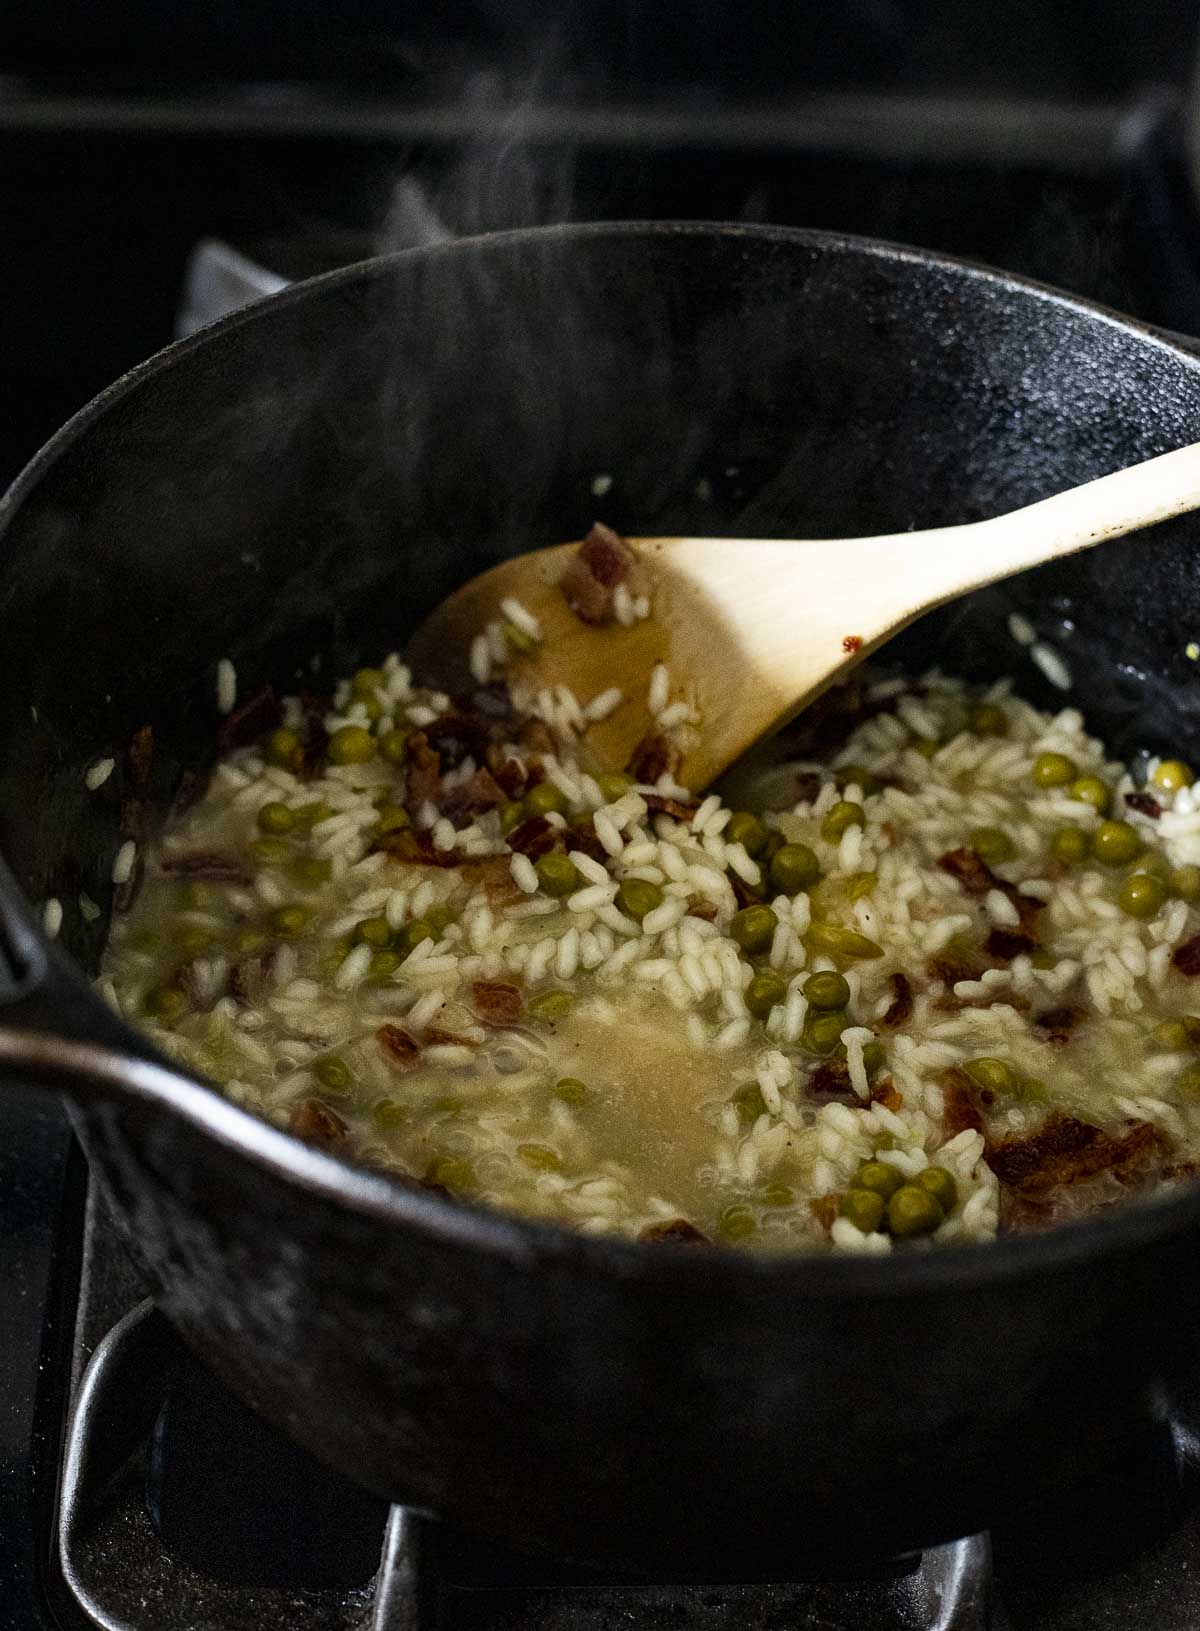 Risotto being stirred around in a Dutch oven with a wooden spoon.